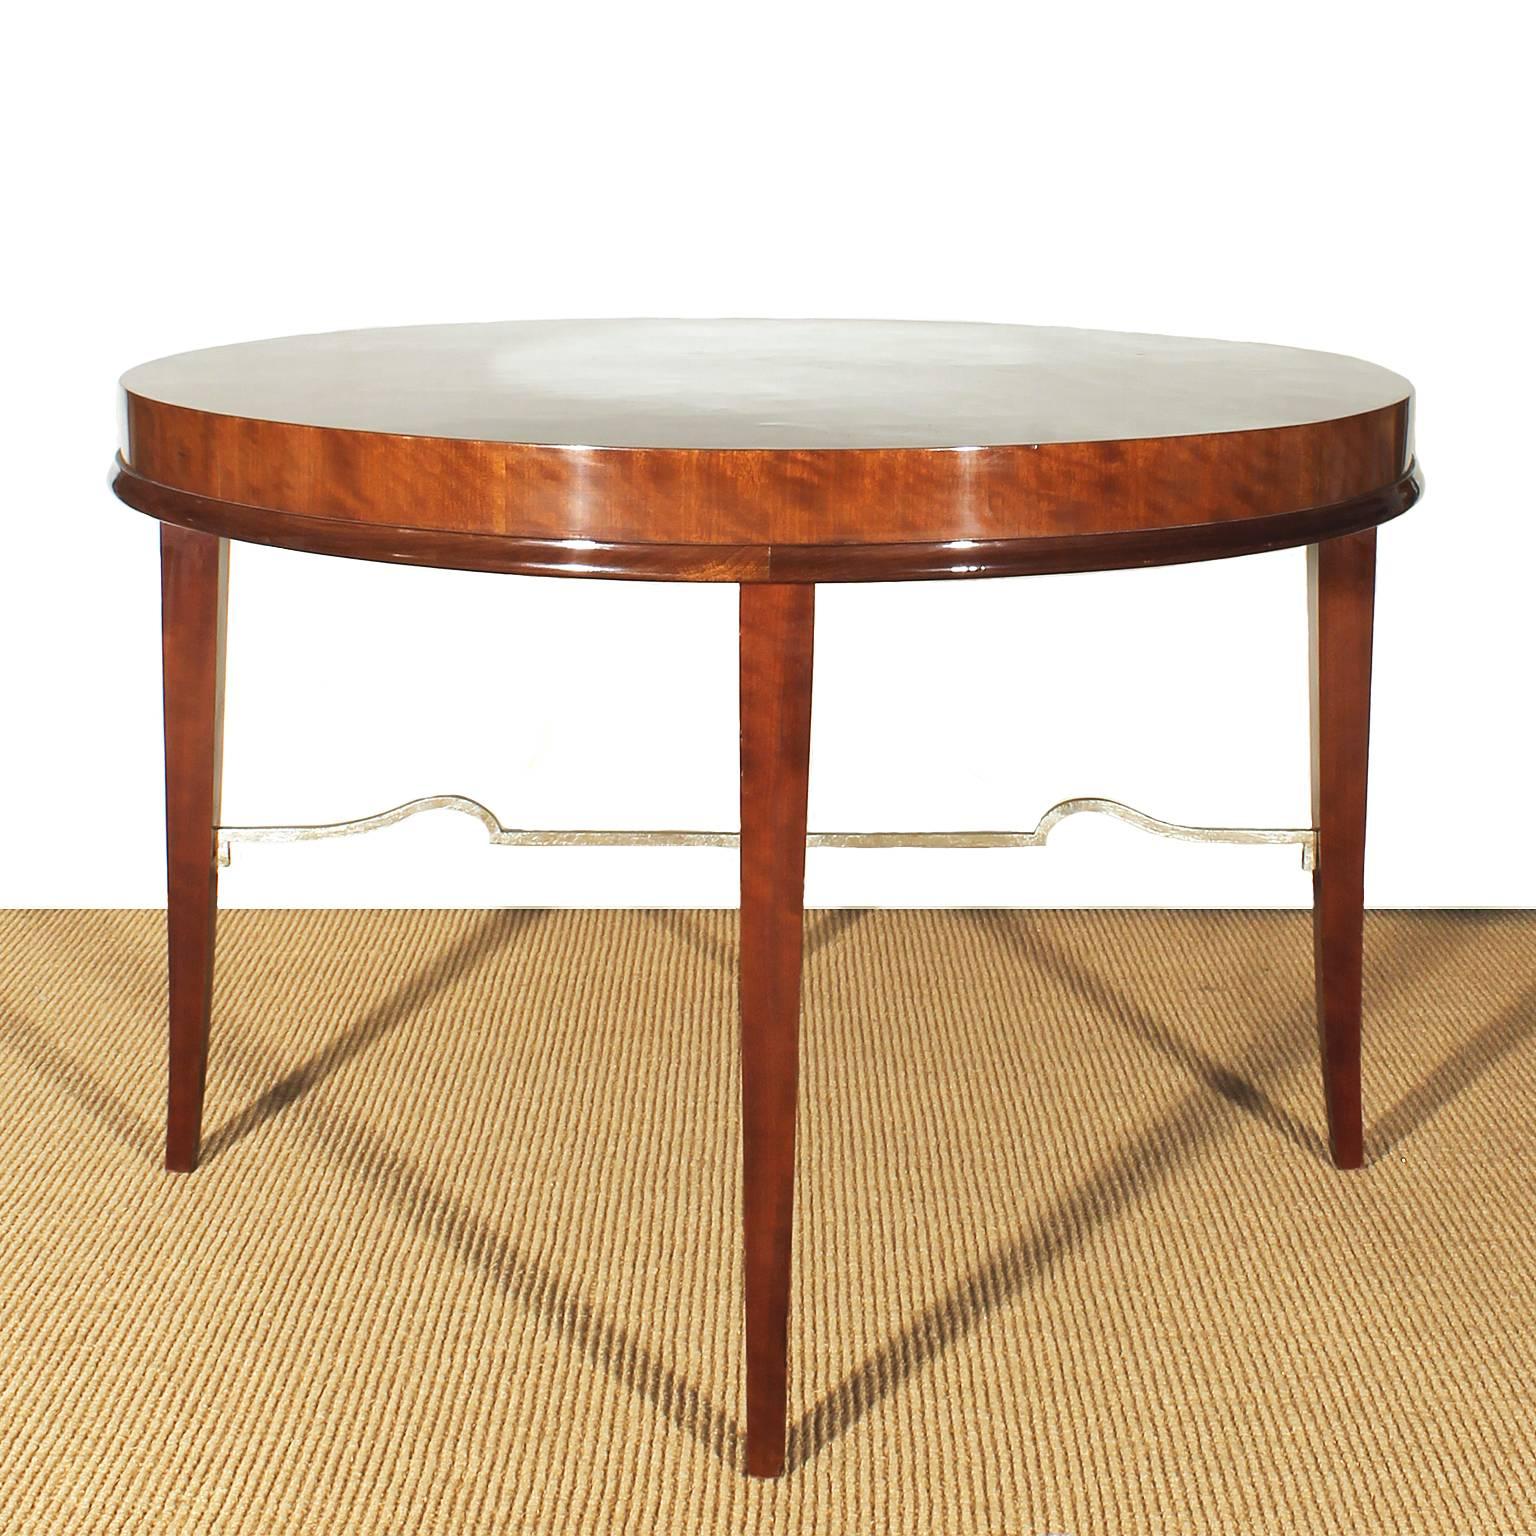 Nice mottled mahogany round sidetable with silver leaves gilded spacer.
Design: De Coene
Belgium c. 1940.